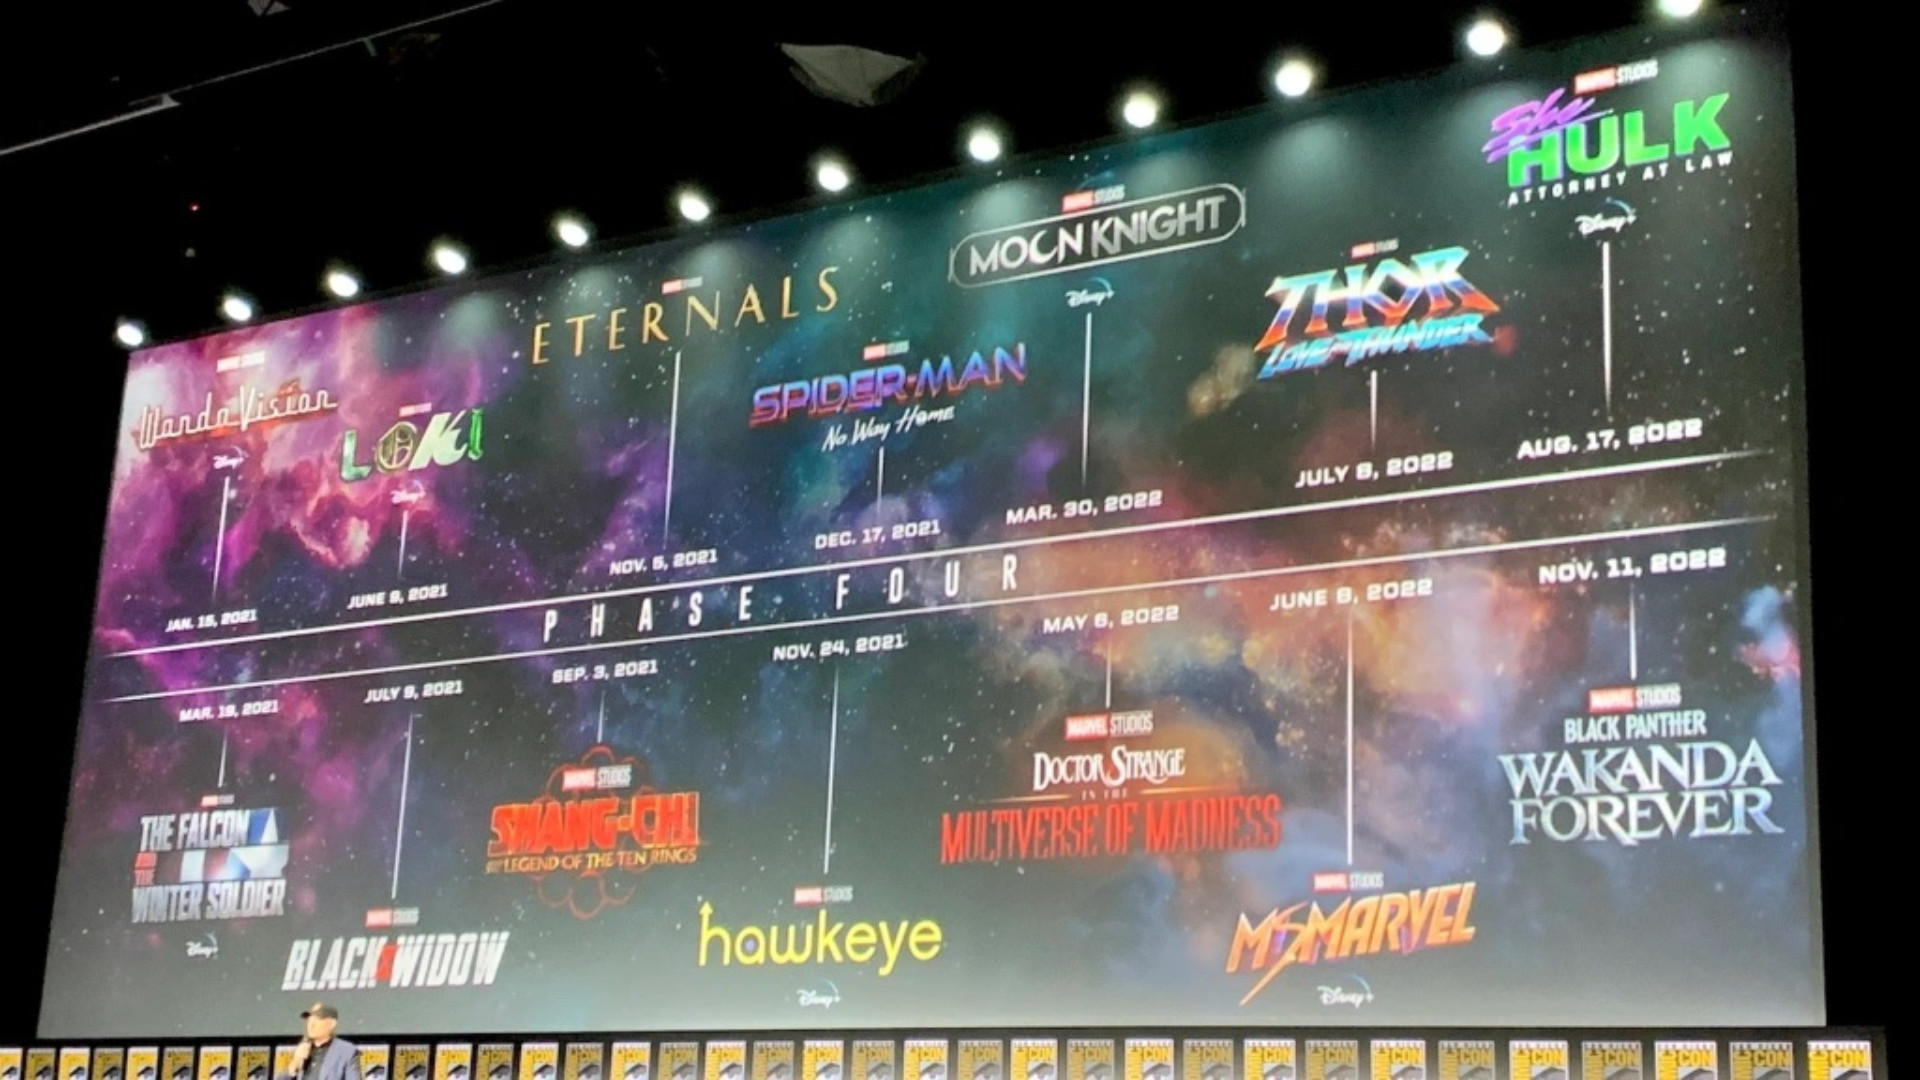 Thor: Love and Thunder Reactions Call It the Best of Phase 4